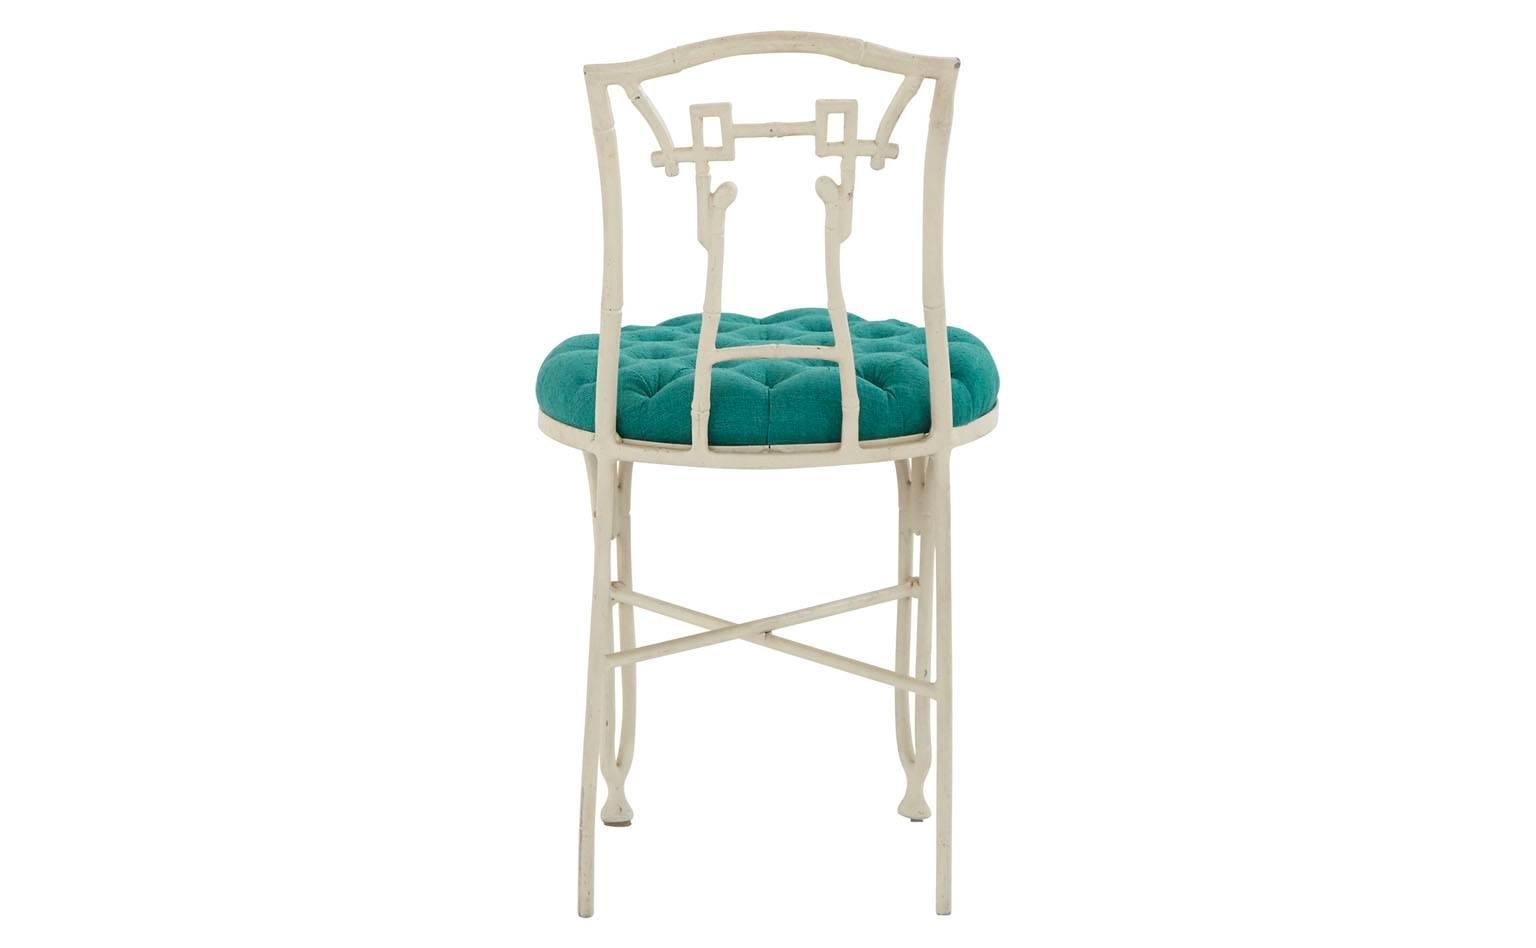 American Faux Bamboo Chair